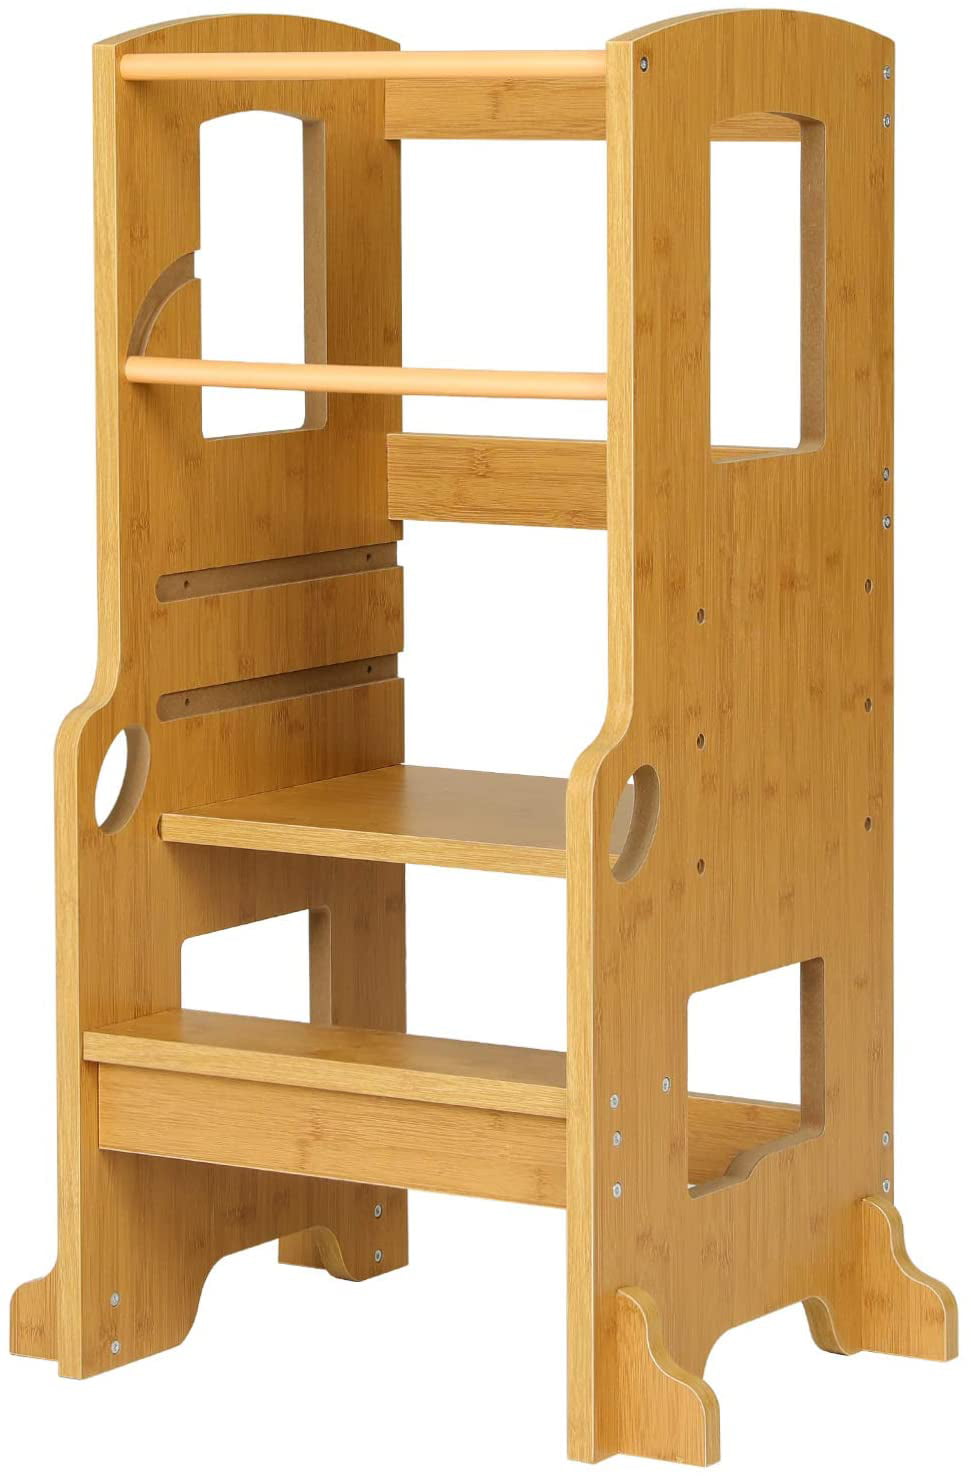 STRUGGLE Kitchen Step Stool Tower Double for Kids Adjustable Height Learning Stool,Solid Wood Construction Toddler Tower Natural